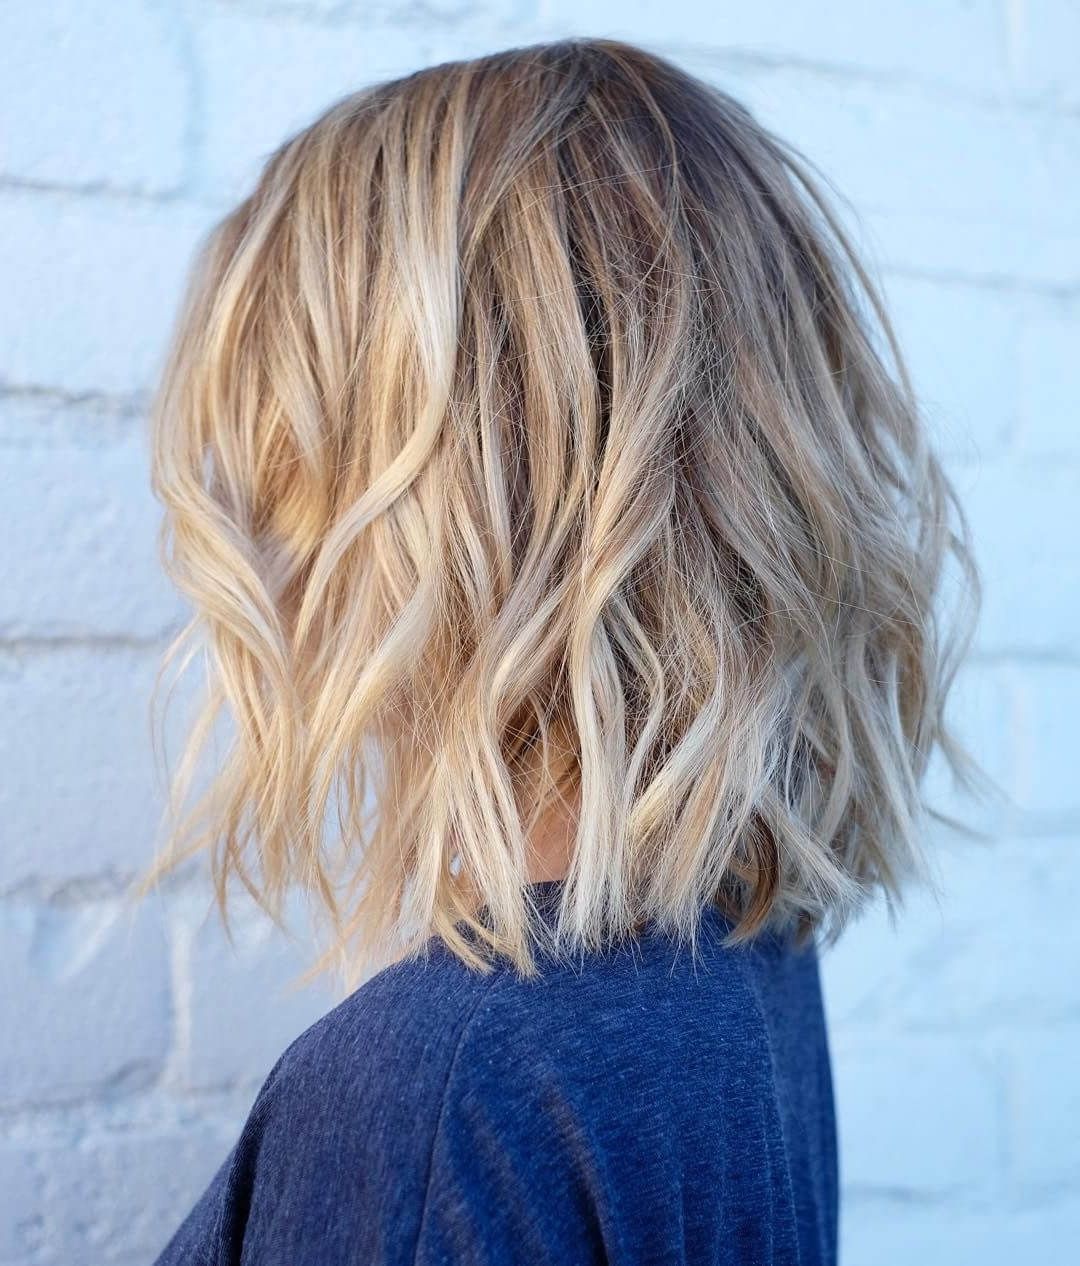 50 Fresh Short Blonde Hair Ideas To Update Your Style In 2018 For Newest Ashy Blonde Pixie Haircuts With A Messy Touch (View 7 of 15)